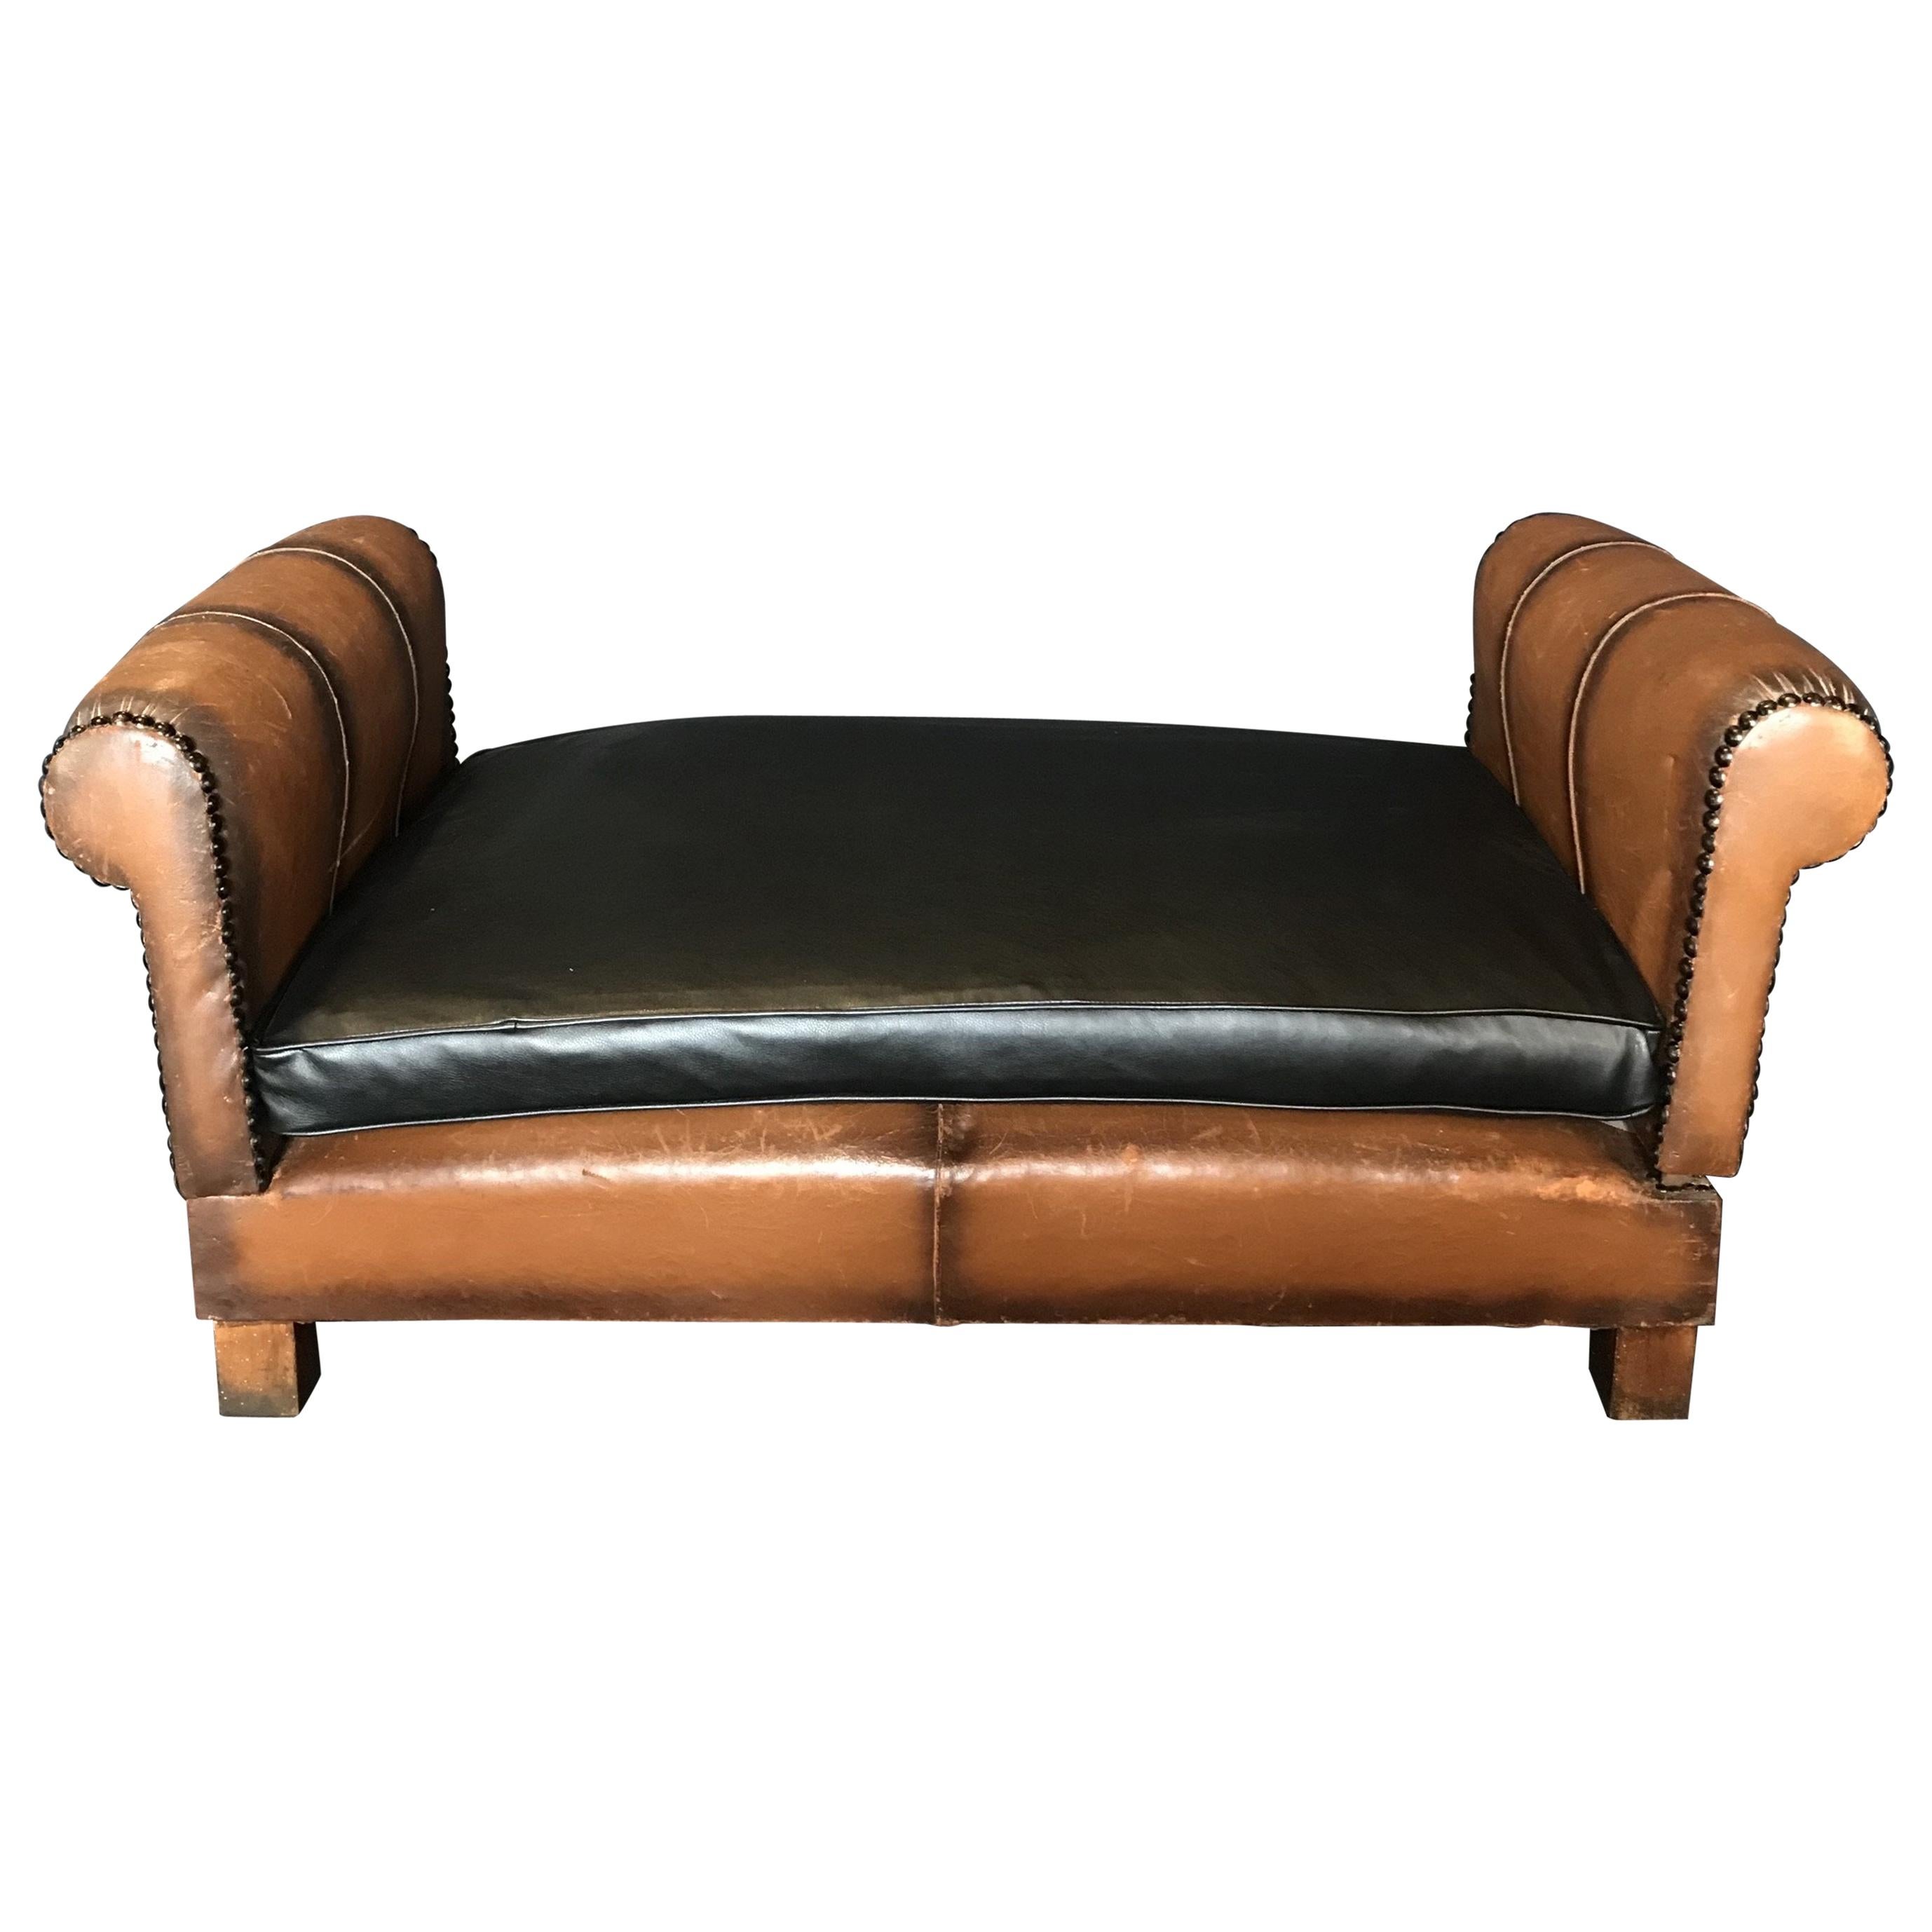 Buttery French Art Deco Leather Convertible Daybed Bench